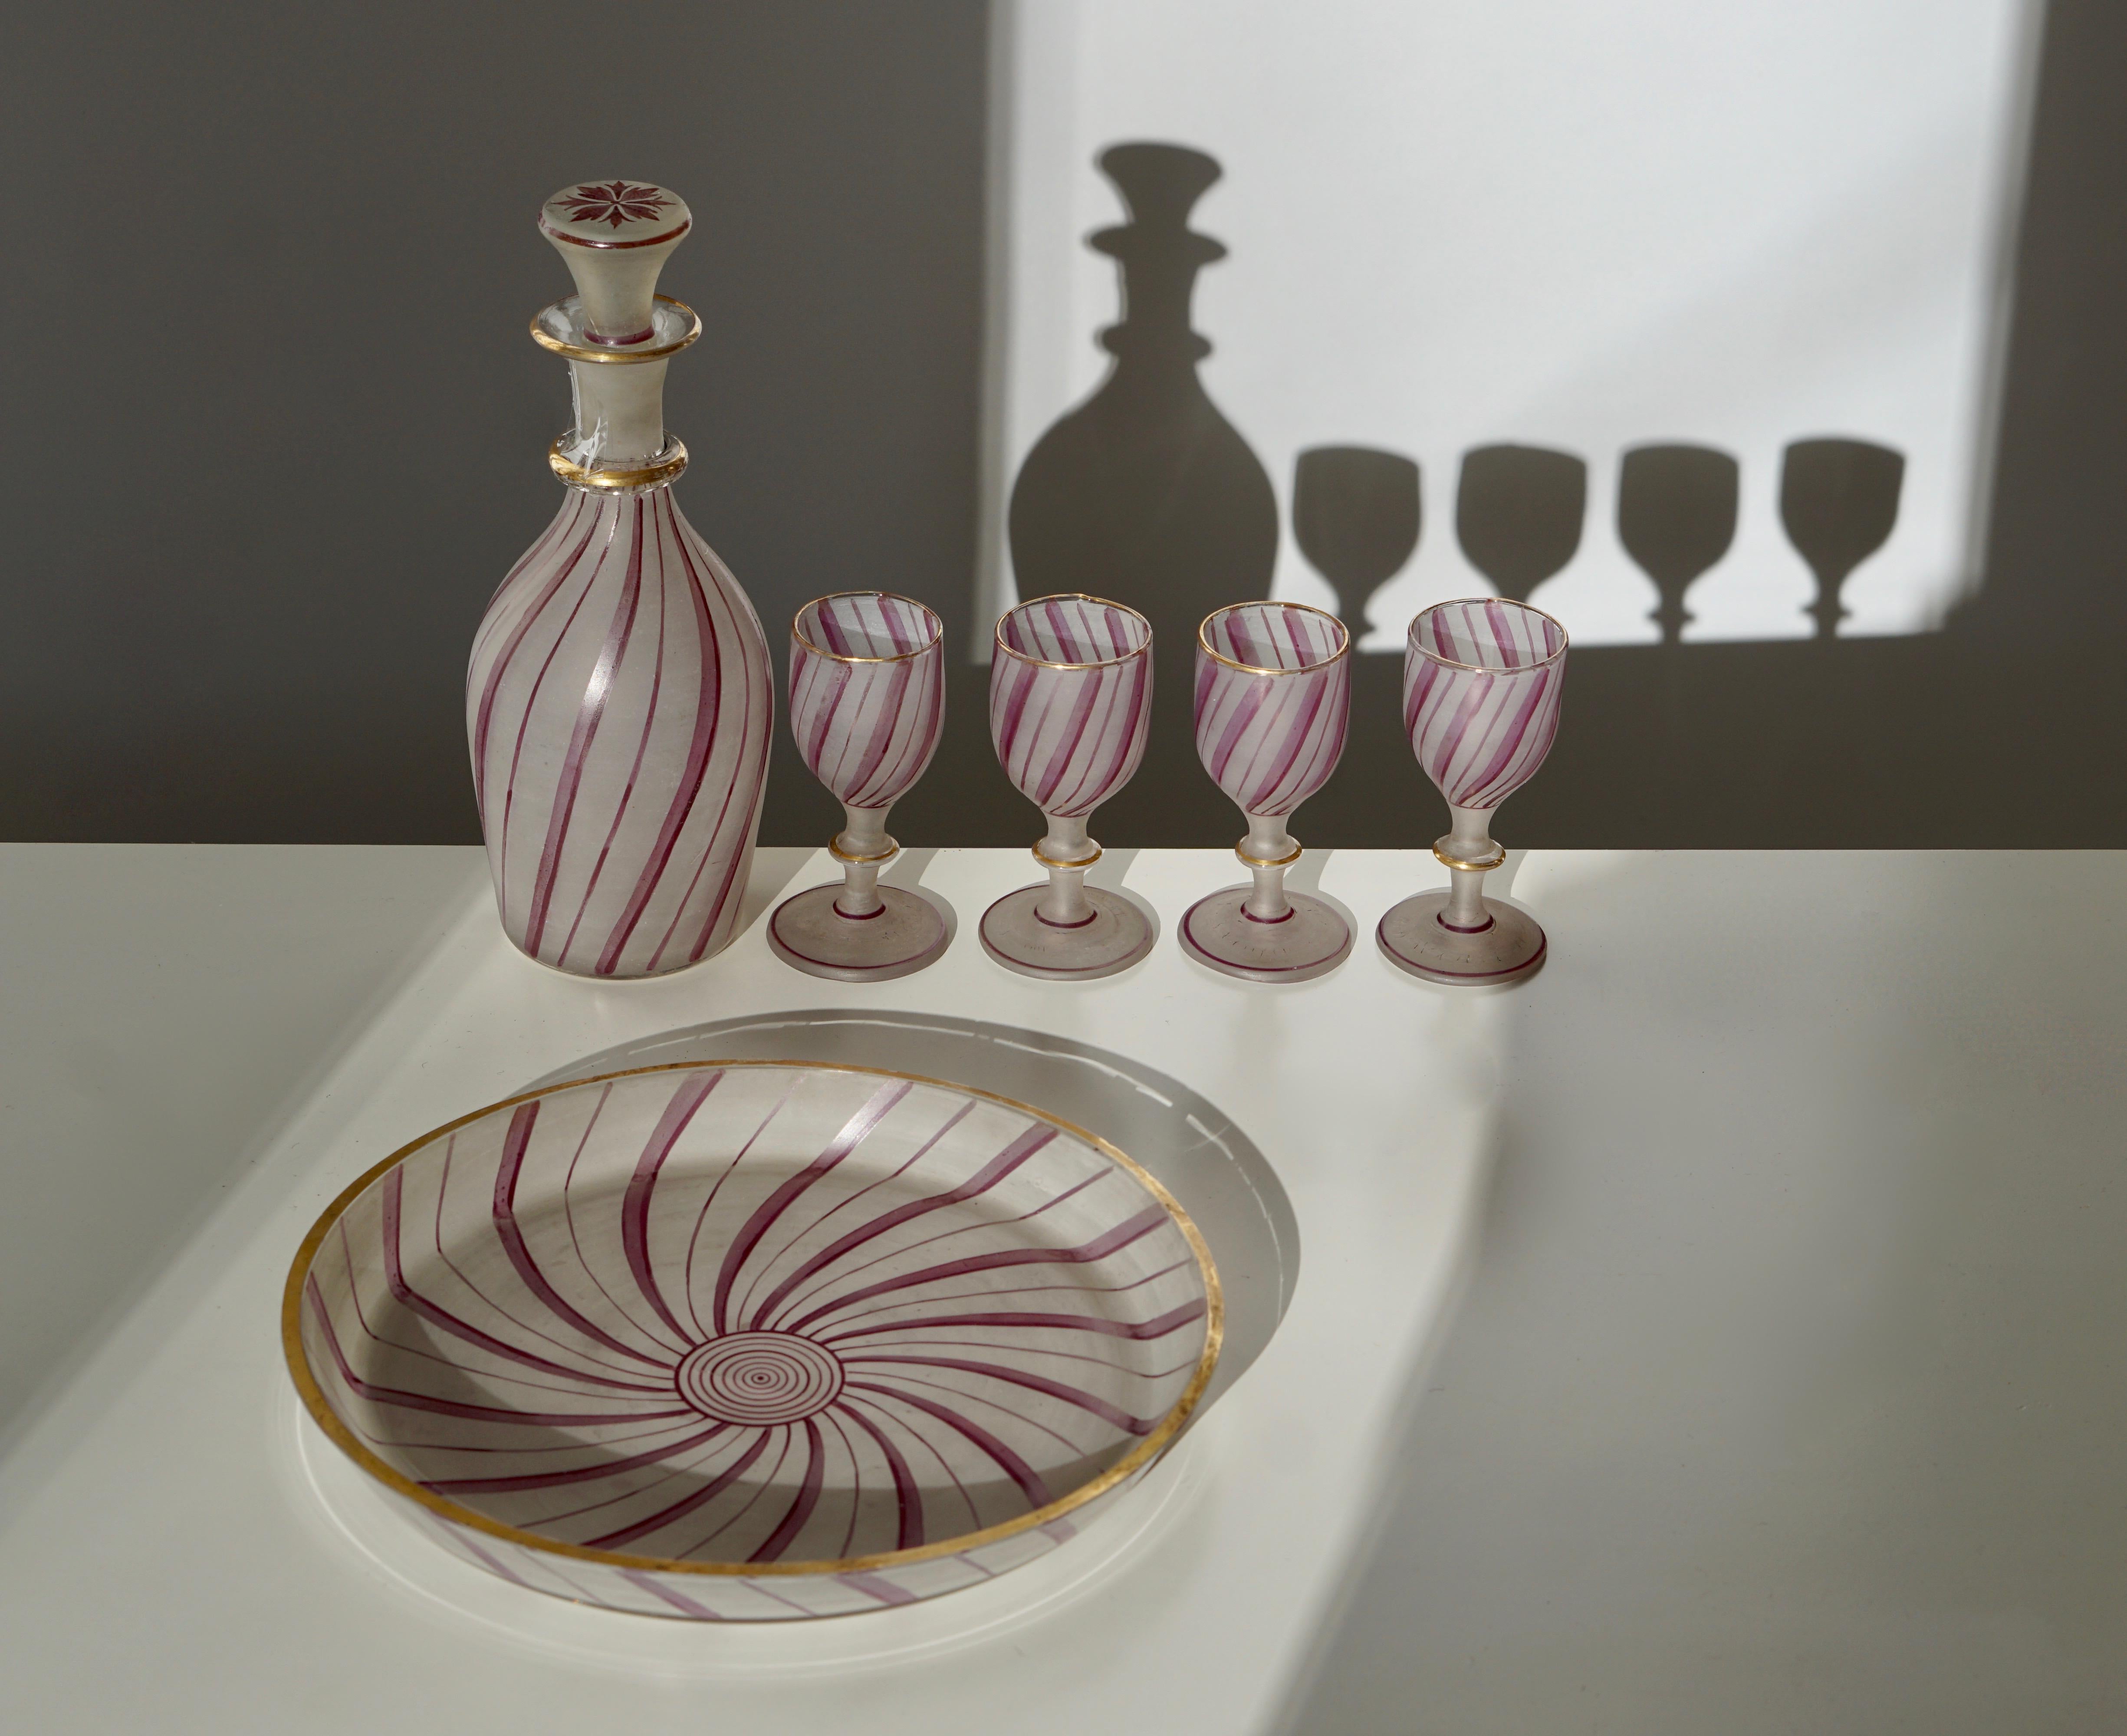 A fine vintage 19th century, Murano glass liquor decanter and stopper with four matching glasses and one bowl for Venini, Italy.
Measures: Each glass 9 cm high and 4 cm diameter.
Decanter 19 cm high and 8 cm diameter.
Bowl 20 cm diameter and 3 cm